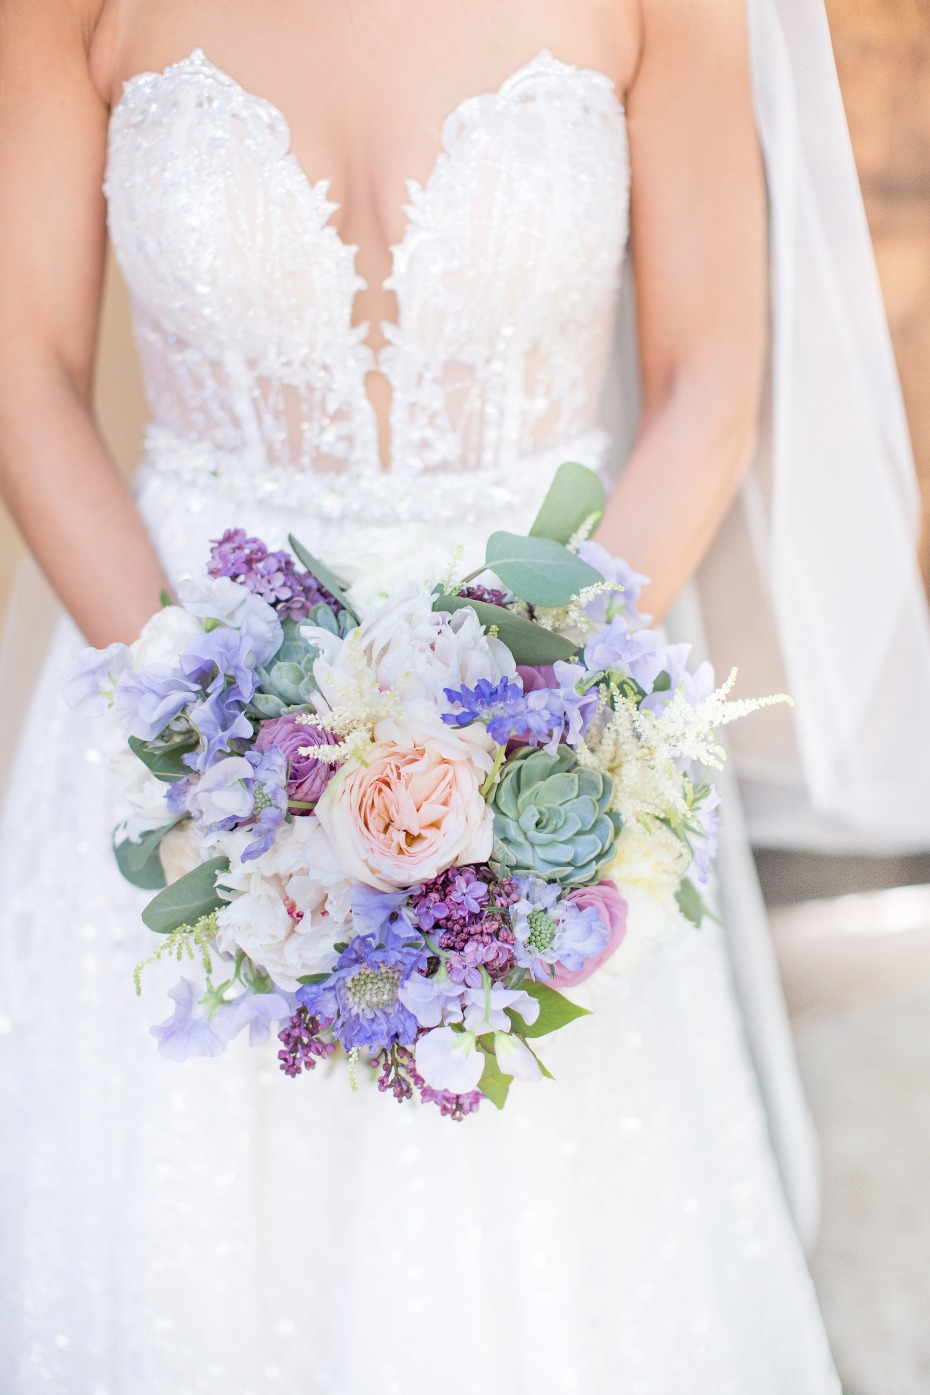 soft and elegant bouquet in blush, lavender and green